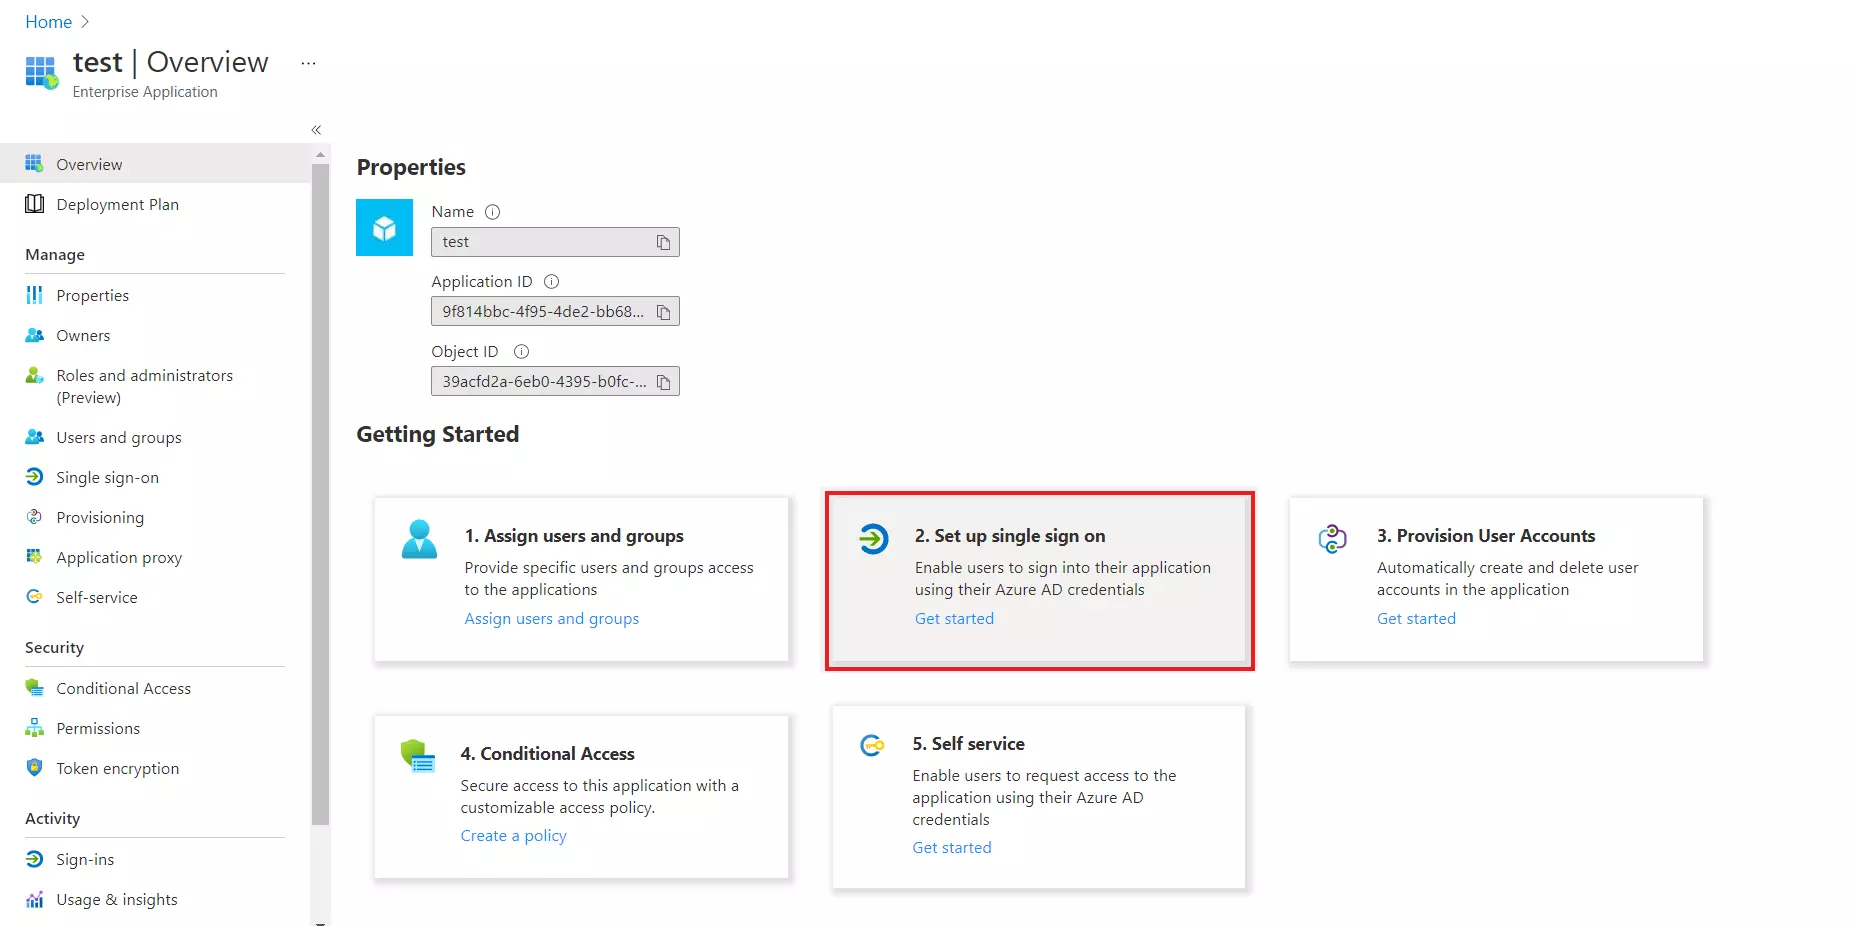 ASP.NET Core SAML Single Sign-On (SSO) using Azure AD as IDP -  Add Non-Gallery Application